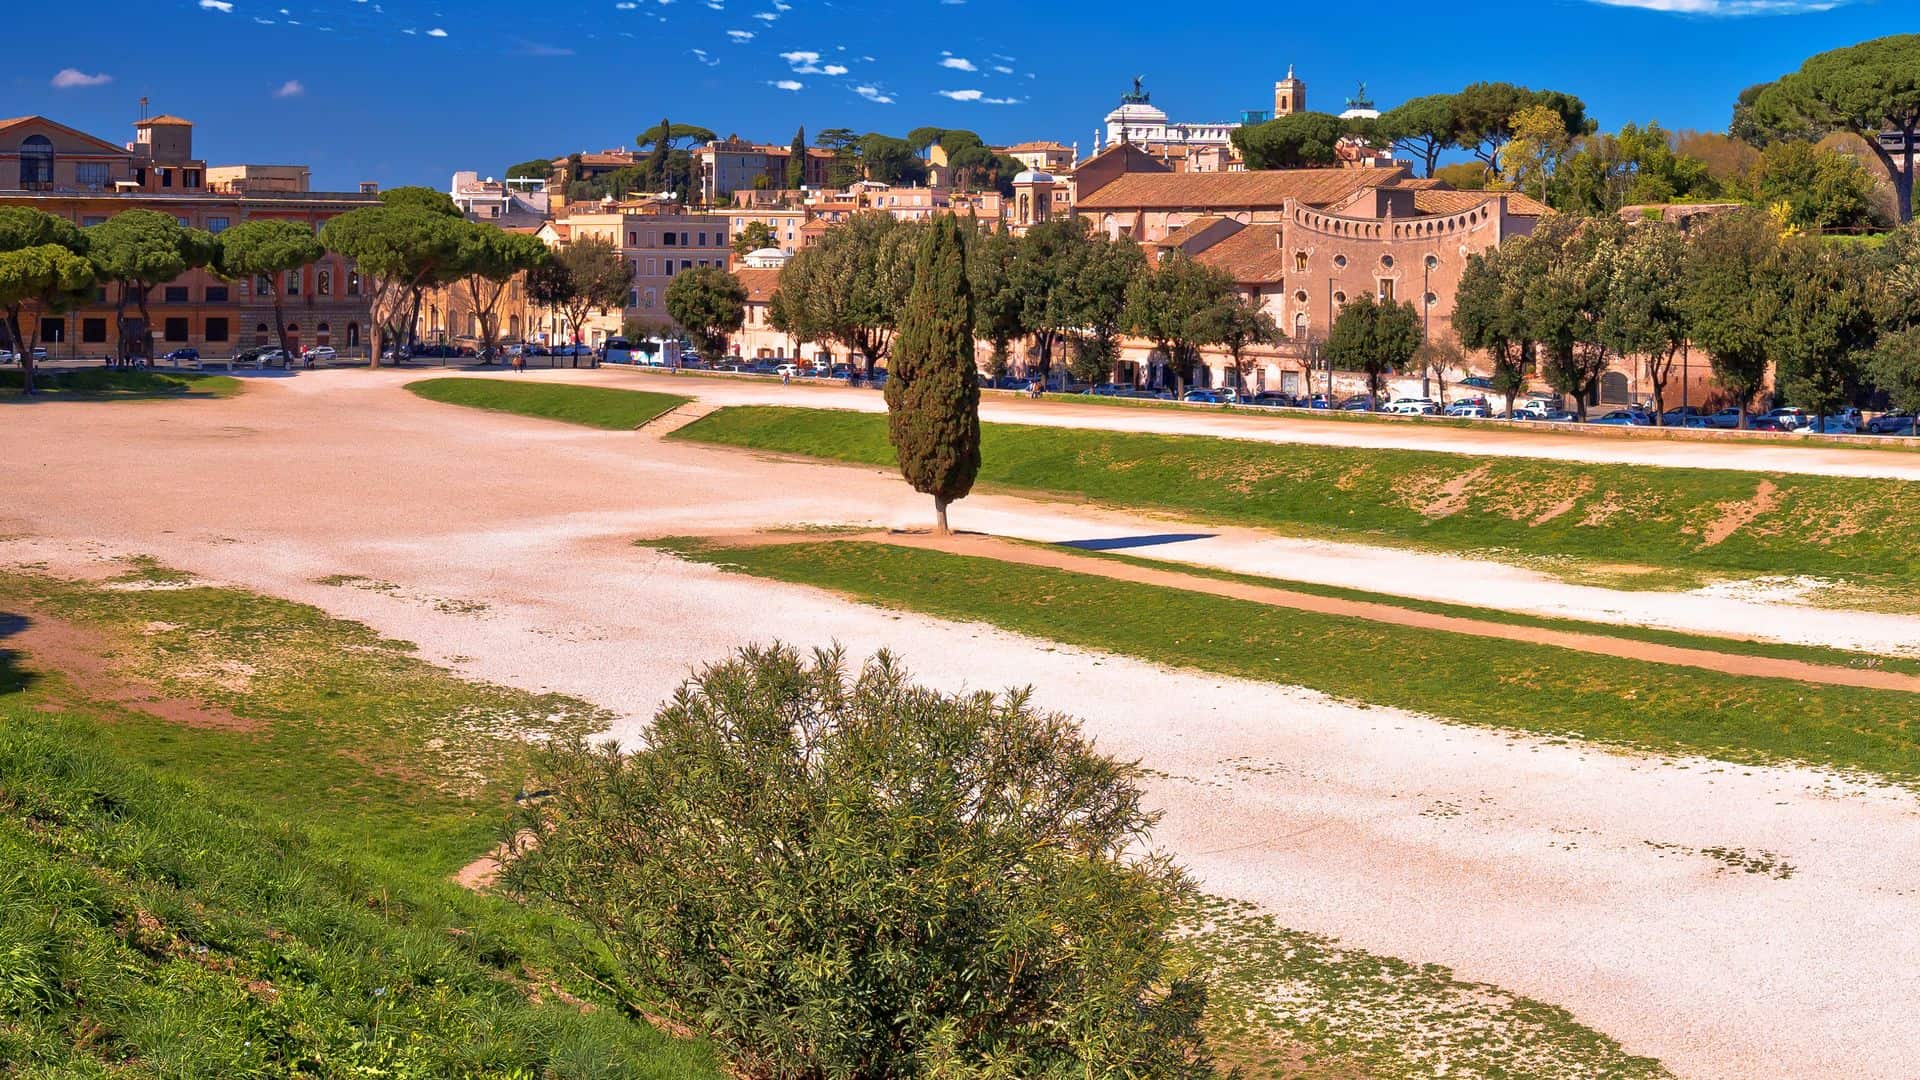 The Circus Maximus and ancient Rome landmarks